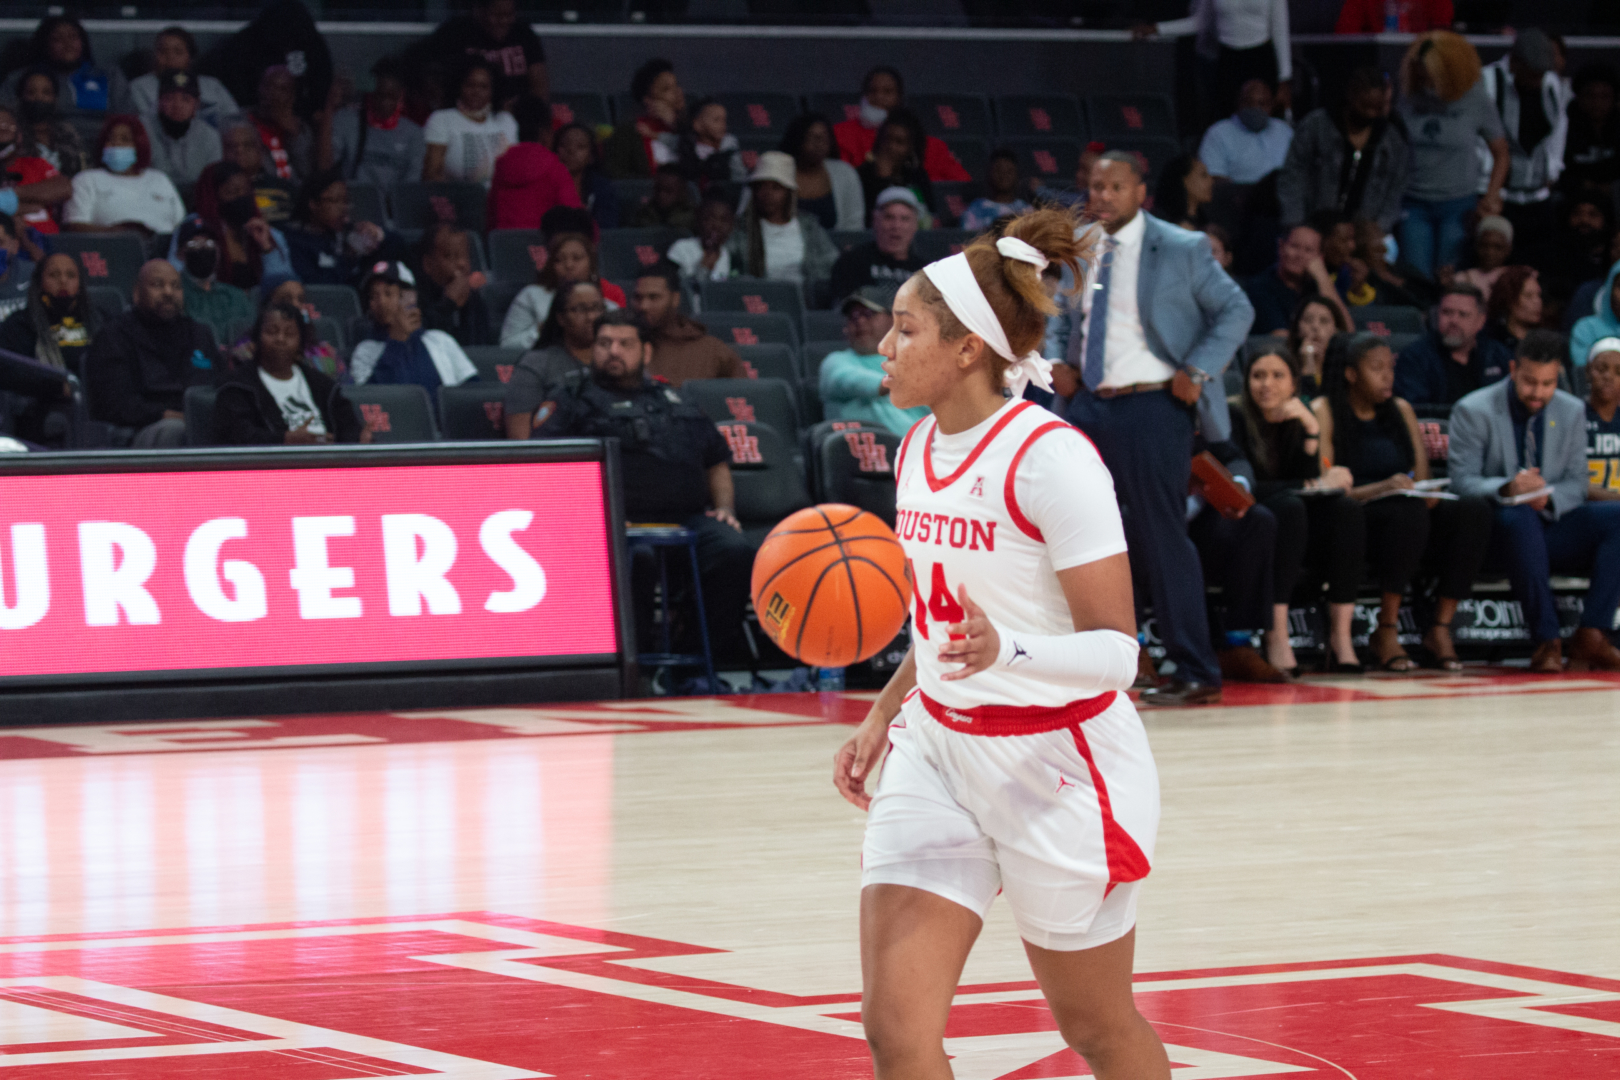 Laila Blair's 23 points helped power the UH women's basketball team past Tulsa. | Esther Umoh/The Cougar